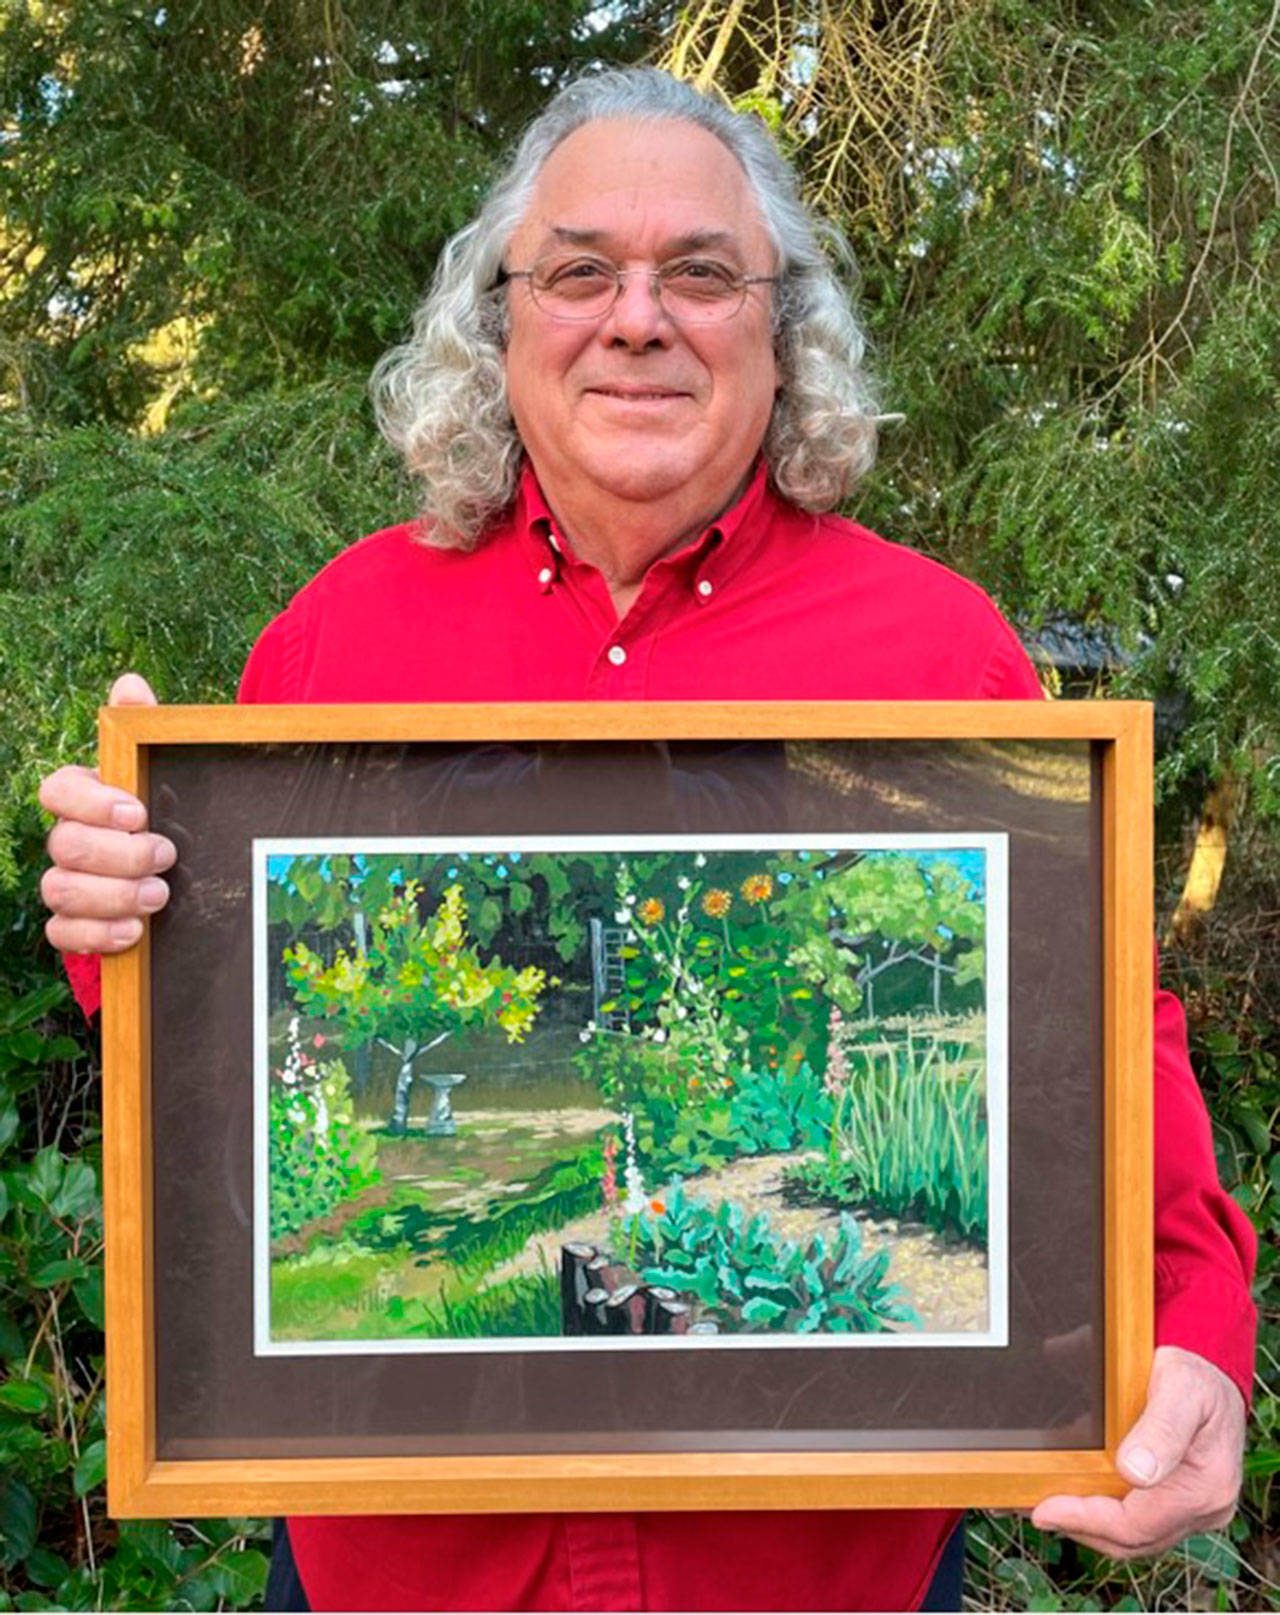 David C. Willis of Sequim saw his artwork “Peaceful Garden” selected for the 2021 CVG Show in Bremerton. Submitted photo